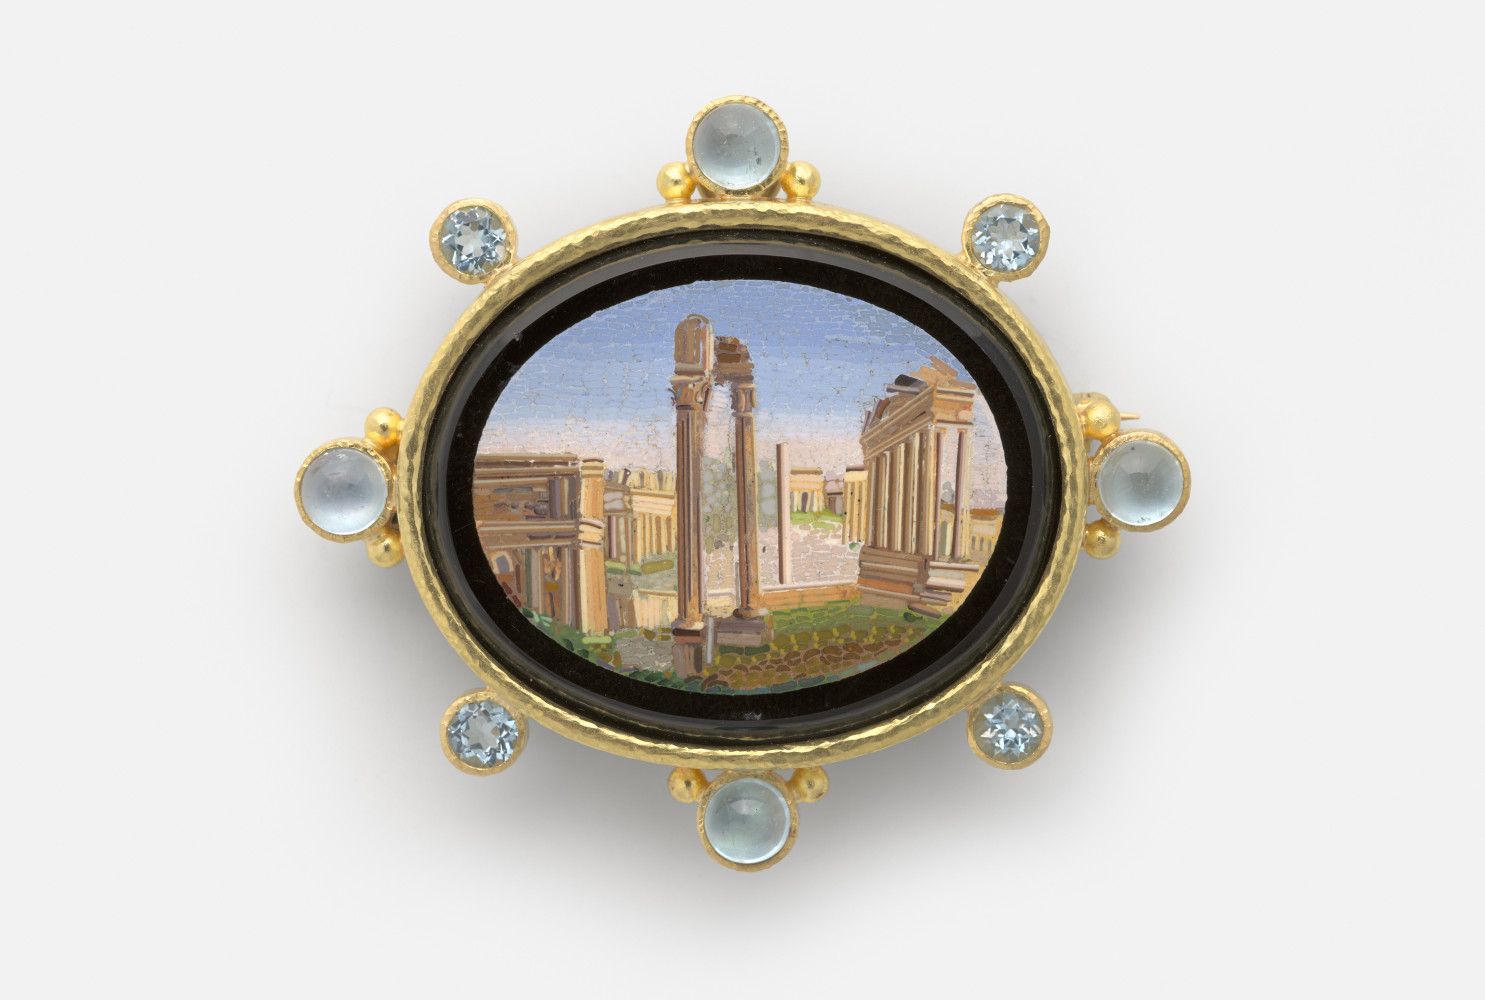 Roman Forum, Rome, 19th century, Micromosaic set in gold as a brooch, with alternating 6-mm cabochon aquamarines with side gold dots and 5-mm faceted aquamarines around bezel; 54 x 62 mm; Collection of Elizabeth Locke; Photo by Travis Fullerton, Virginia Museum of Fine Arts 